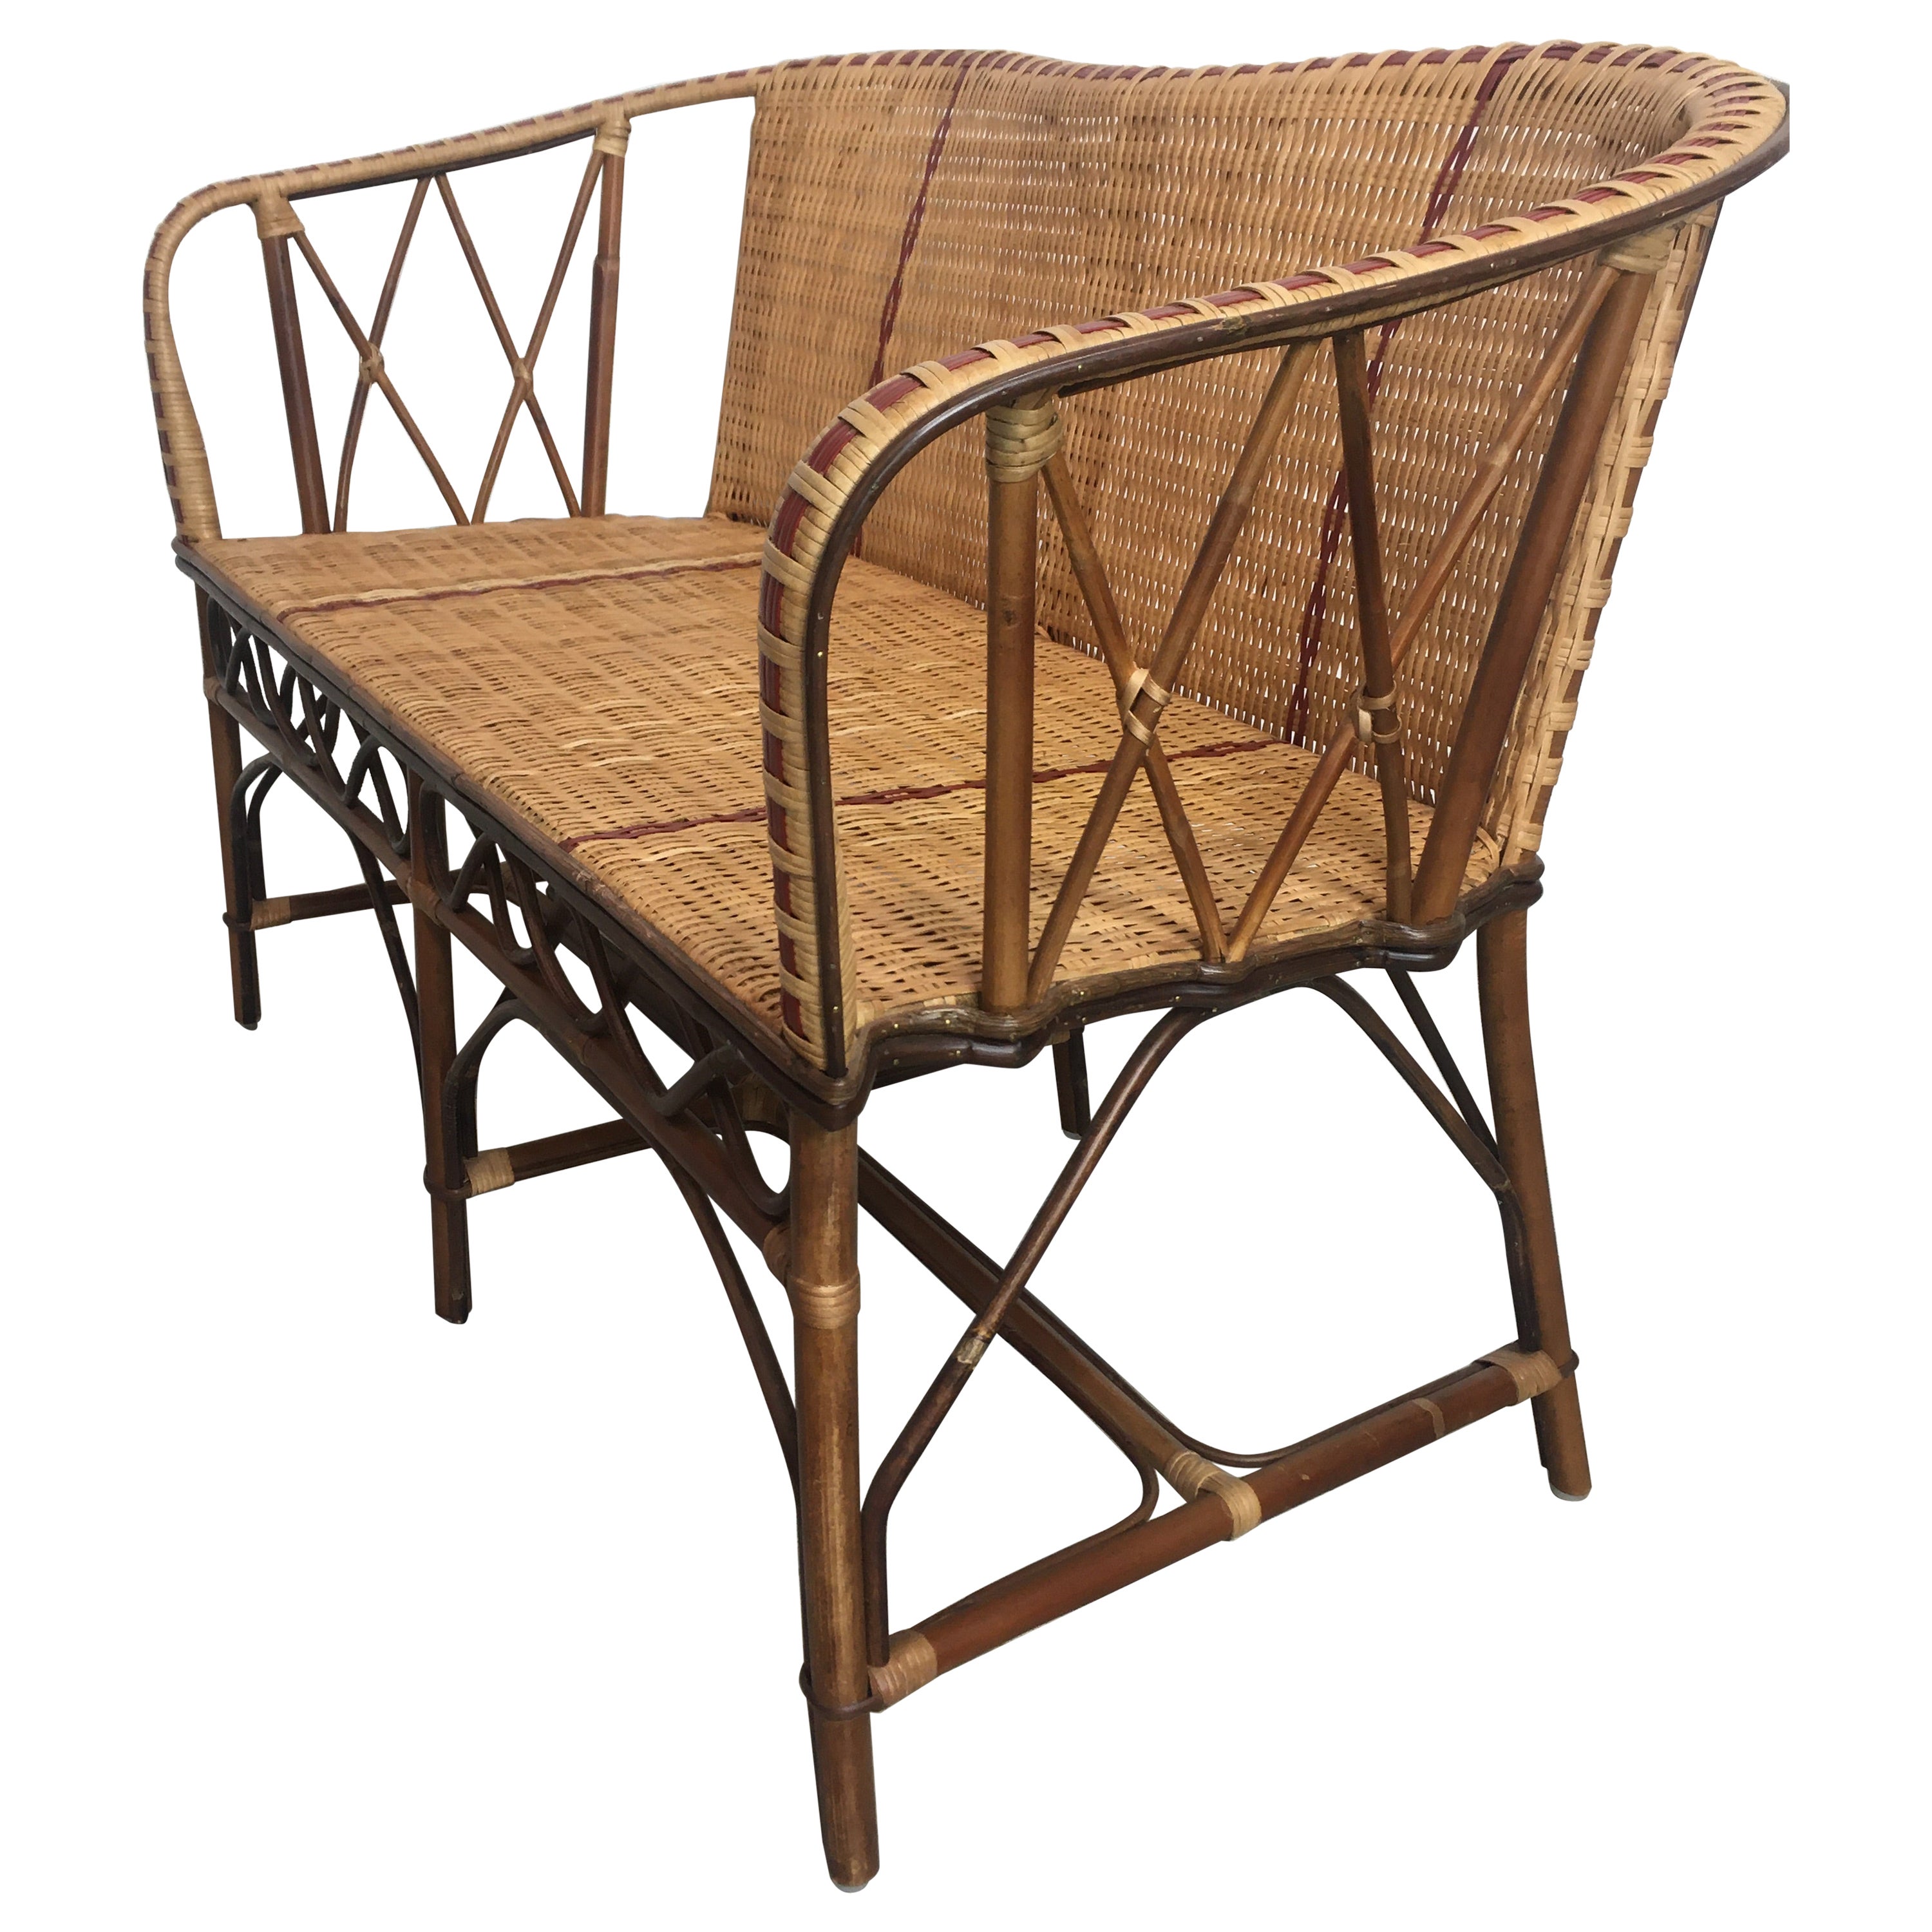 French 1900s Design Bistro Style Sofa In Rattan and Braided Wicker Cane